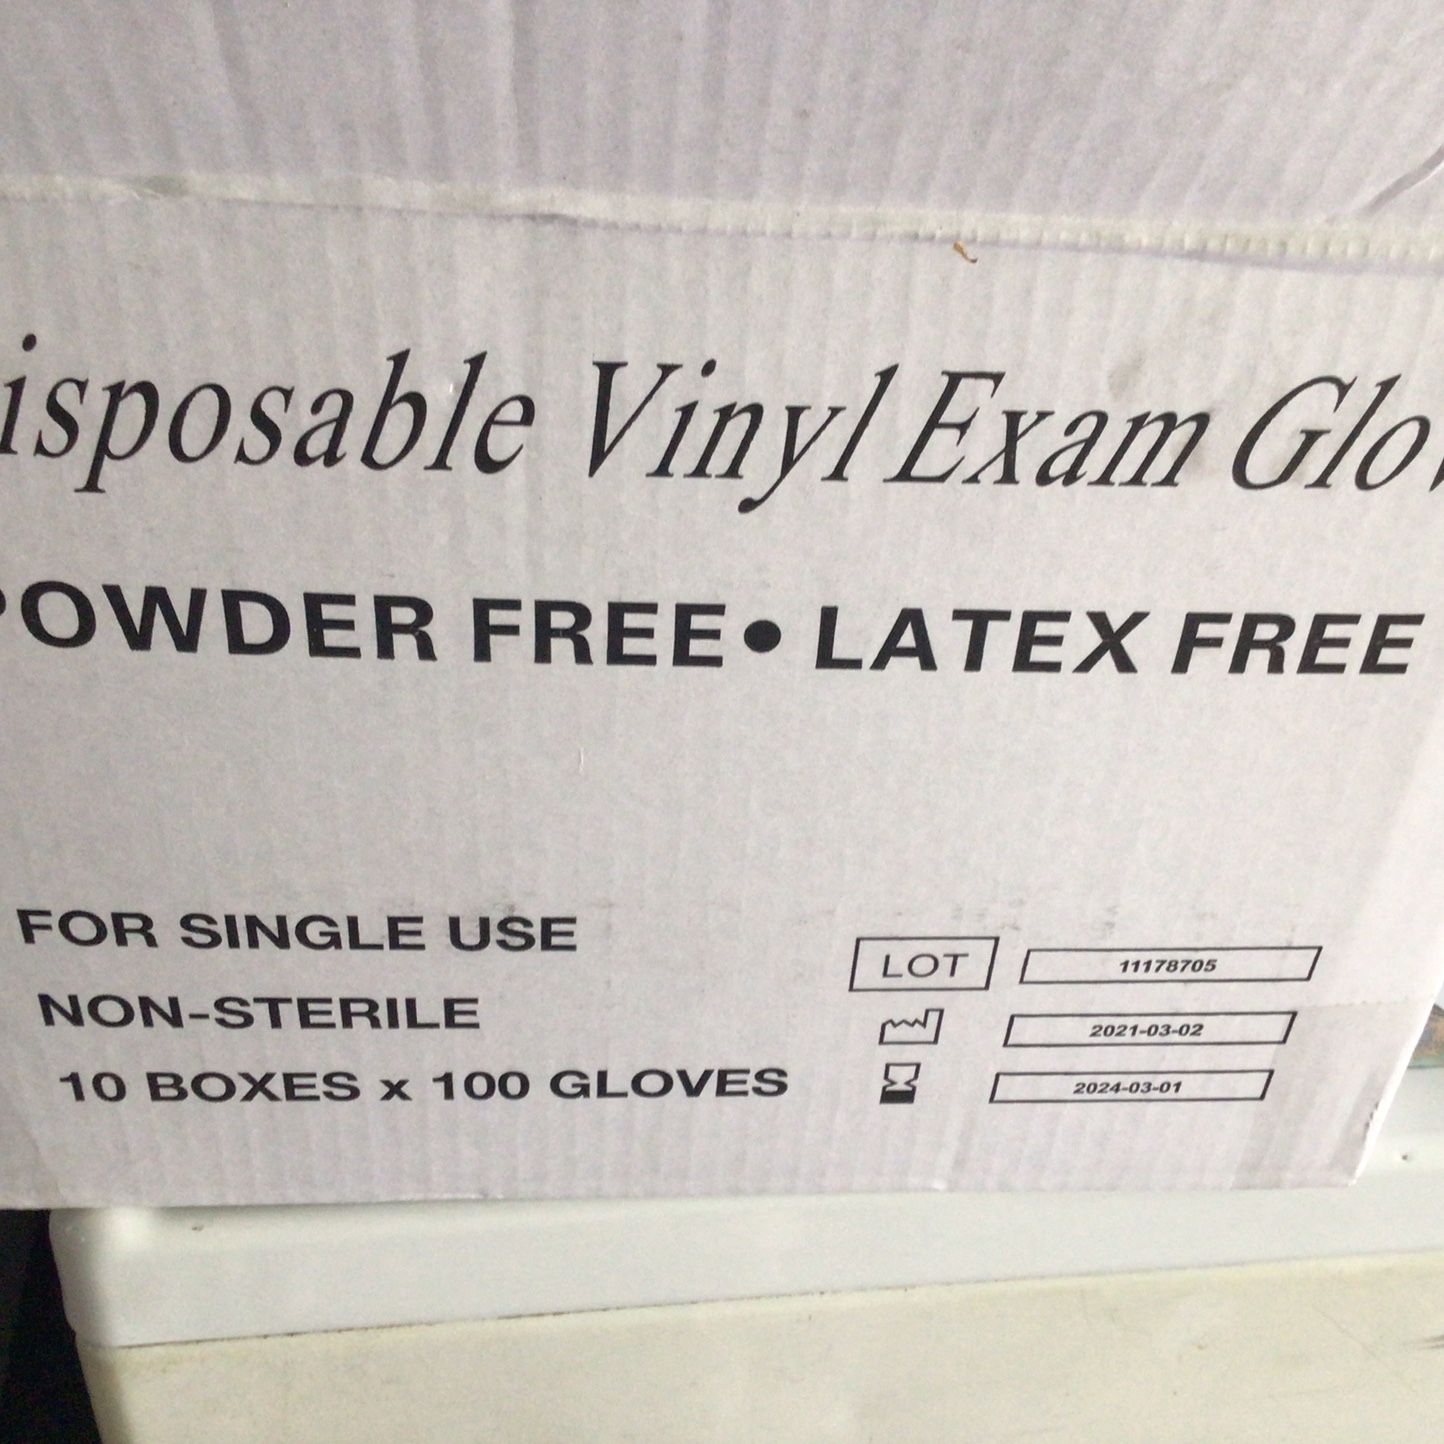 Disposable Vinyl Exam Gloves Powder Free Latex Free Sz Small -14 Cases Of 1000 Gloves